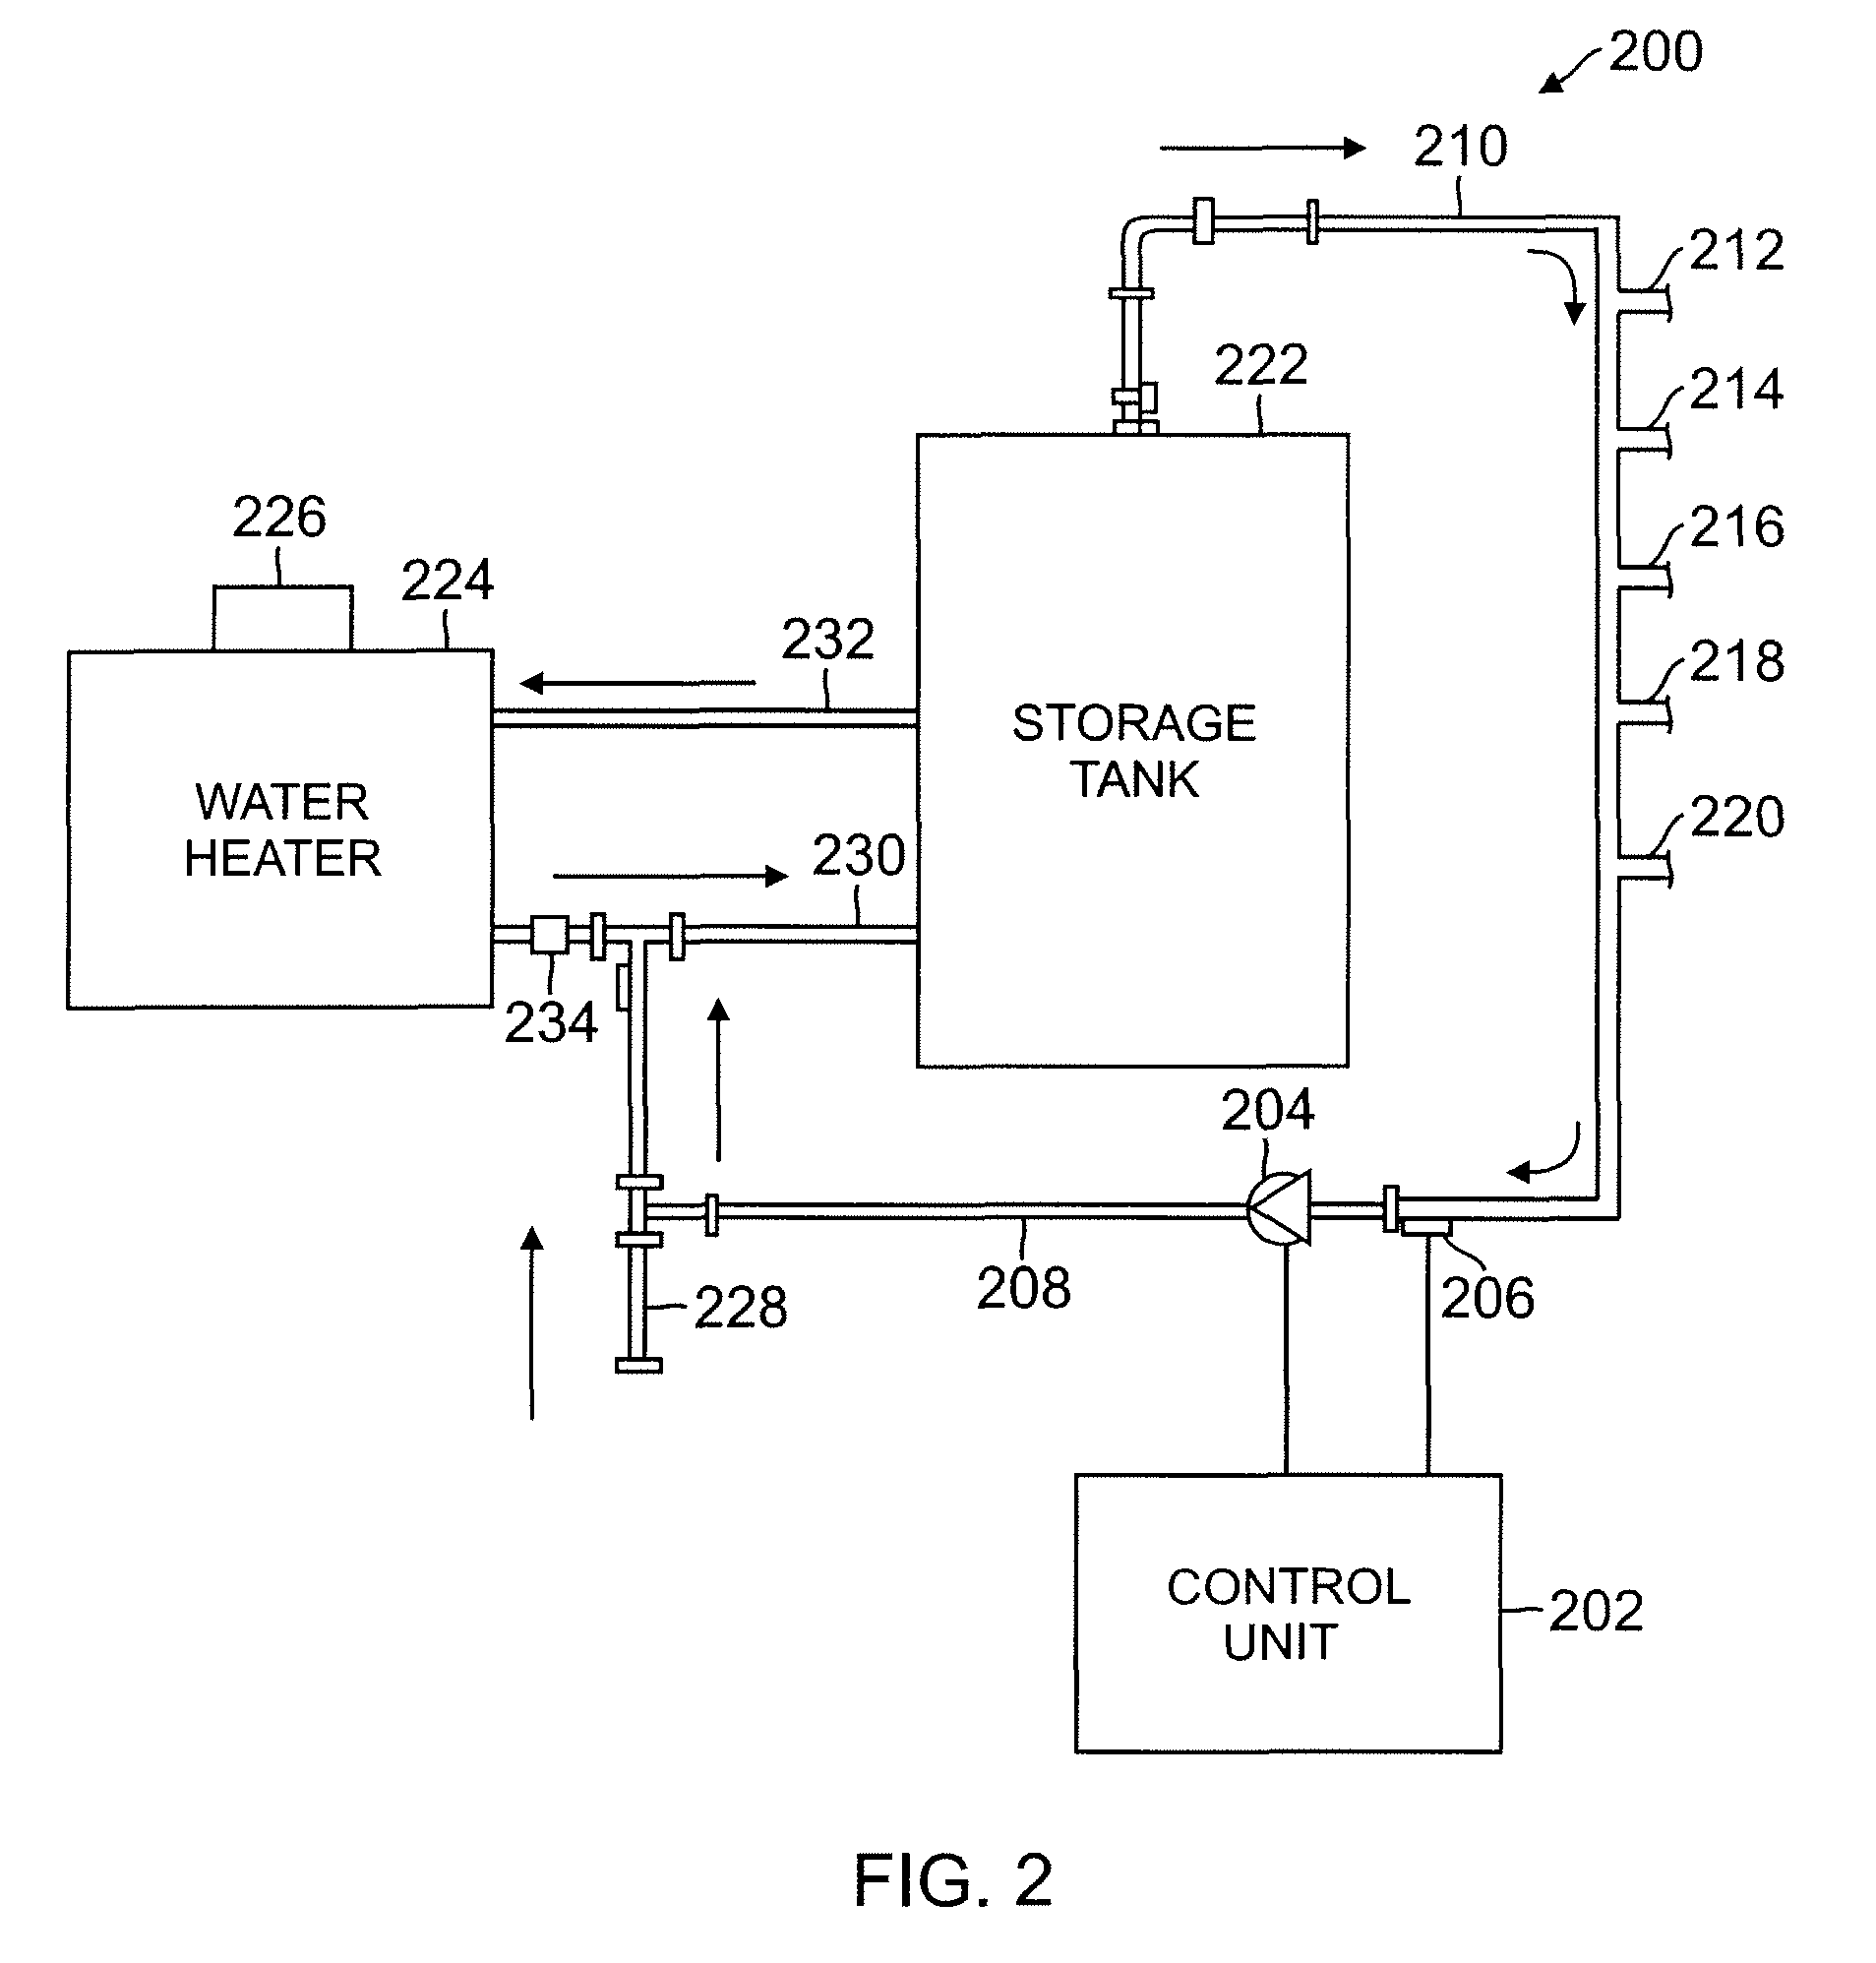 System and method for controlling a pump in a recirculating hot water system